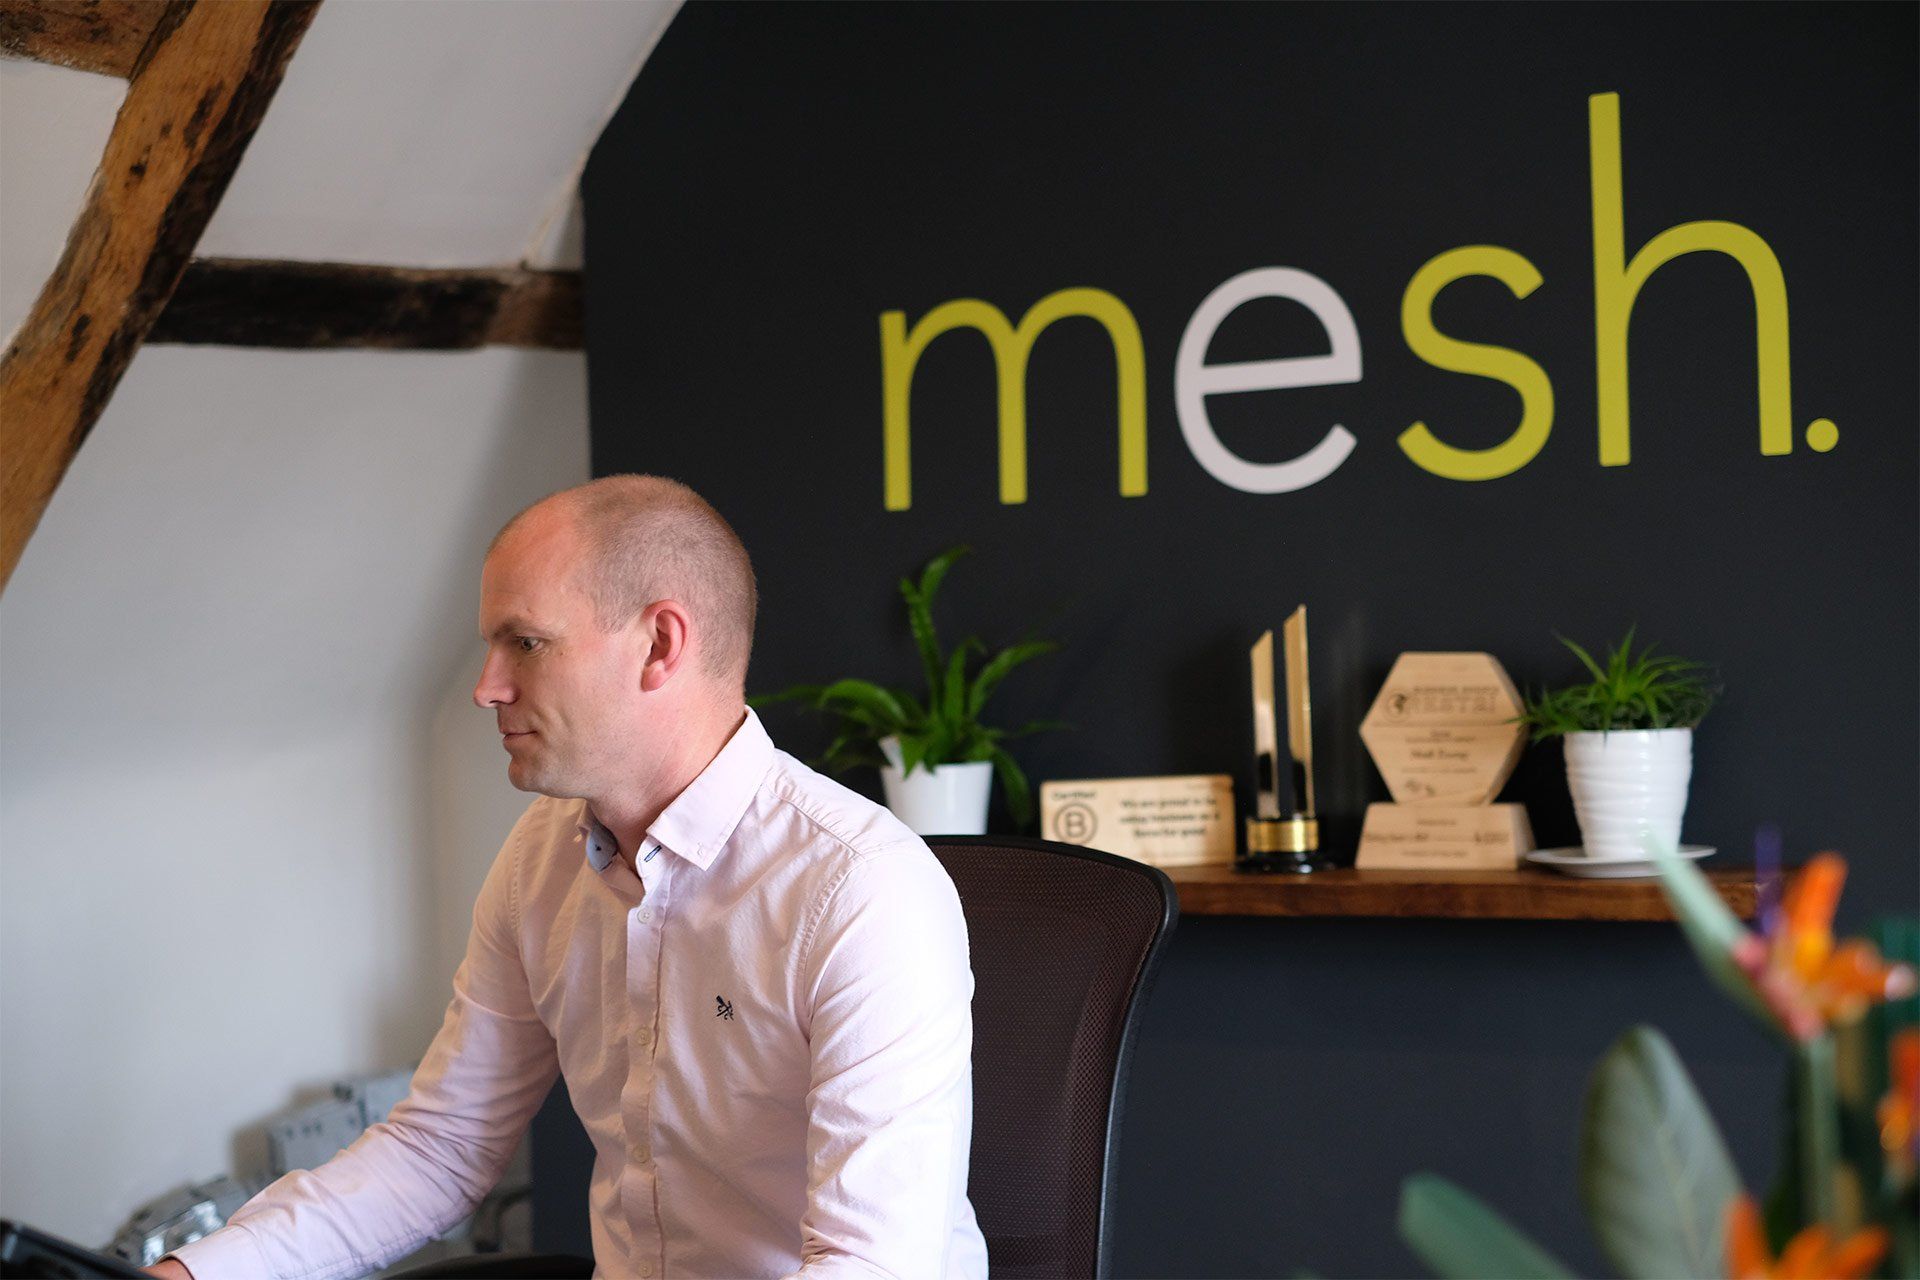 Mesh Energy director Doug, a white man, sits at a desk , concentrating on the screen in front of him. The mesh logo is painted on the wall behind him and several awards are visible on a shelf, including a B-corp award.